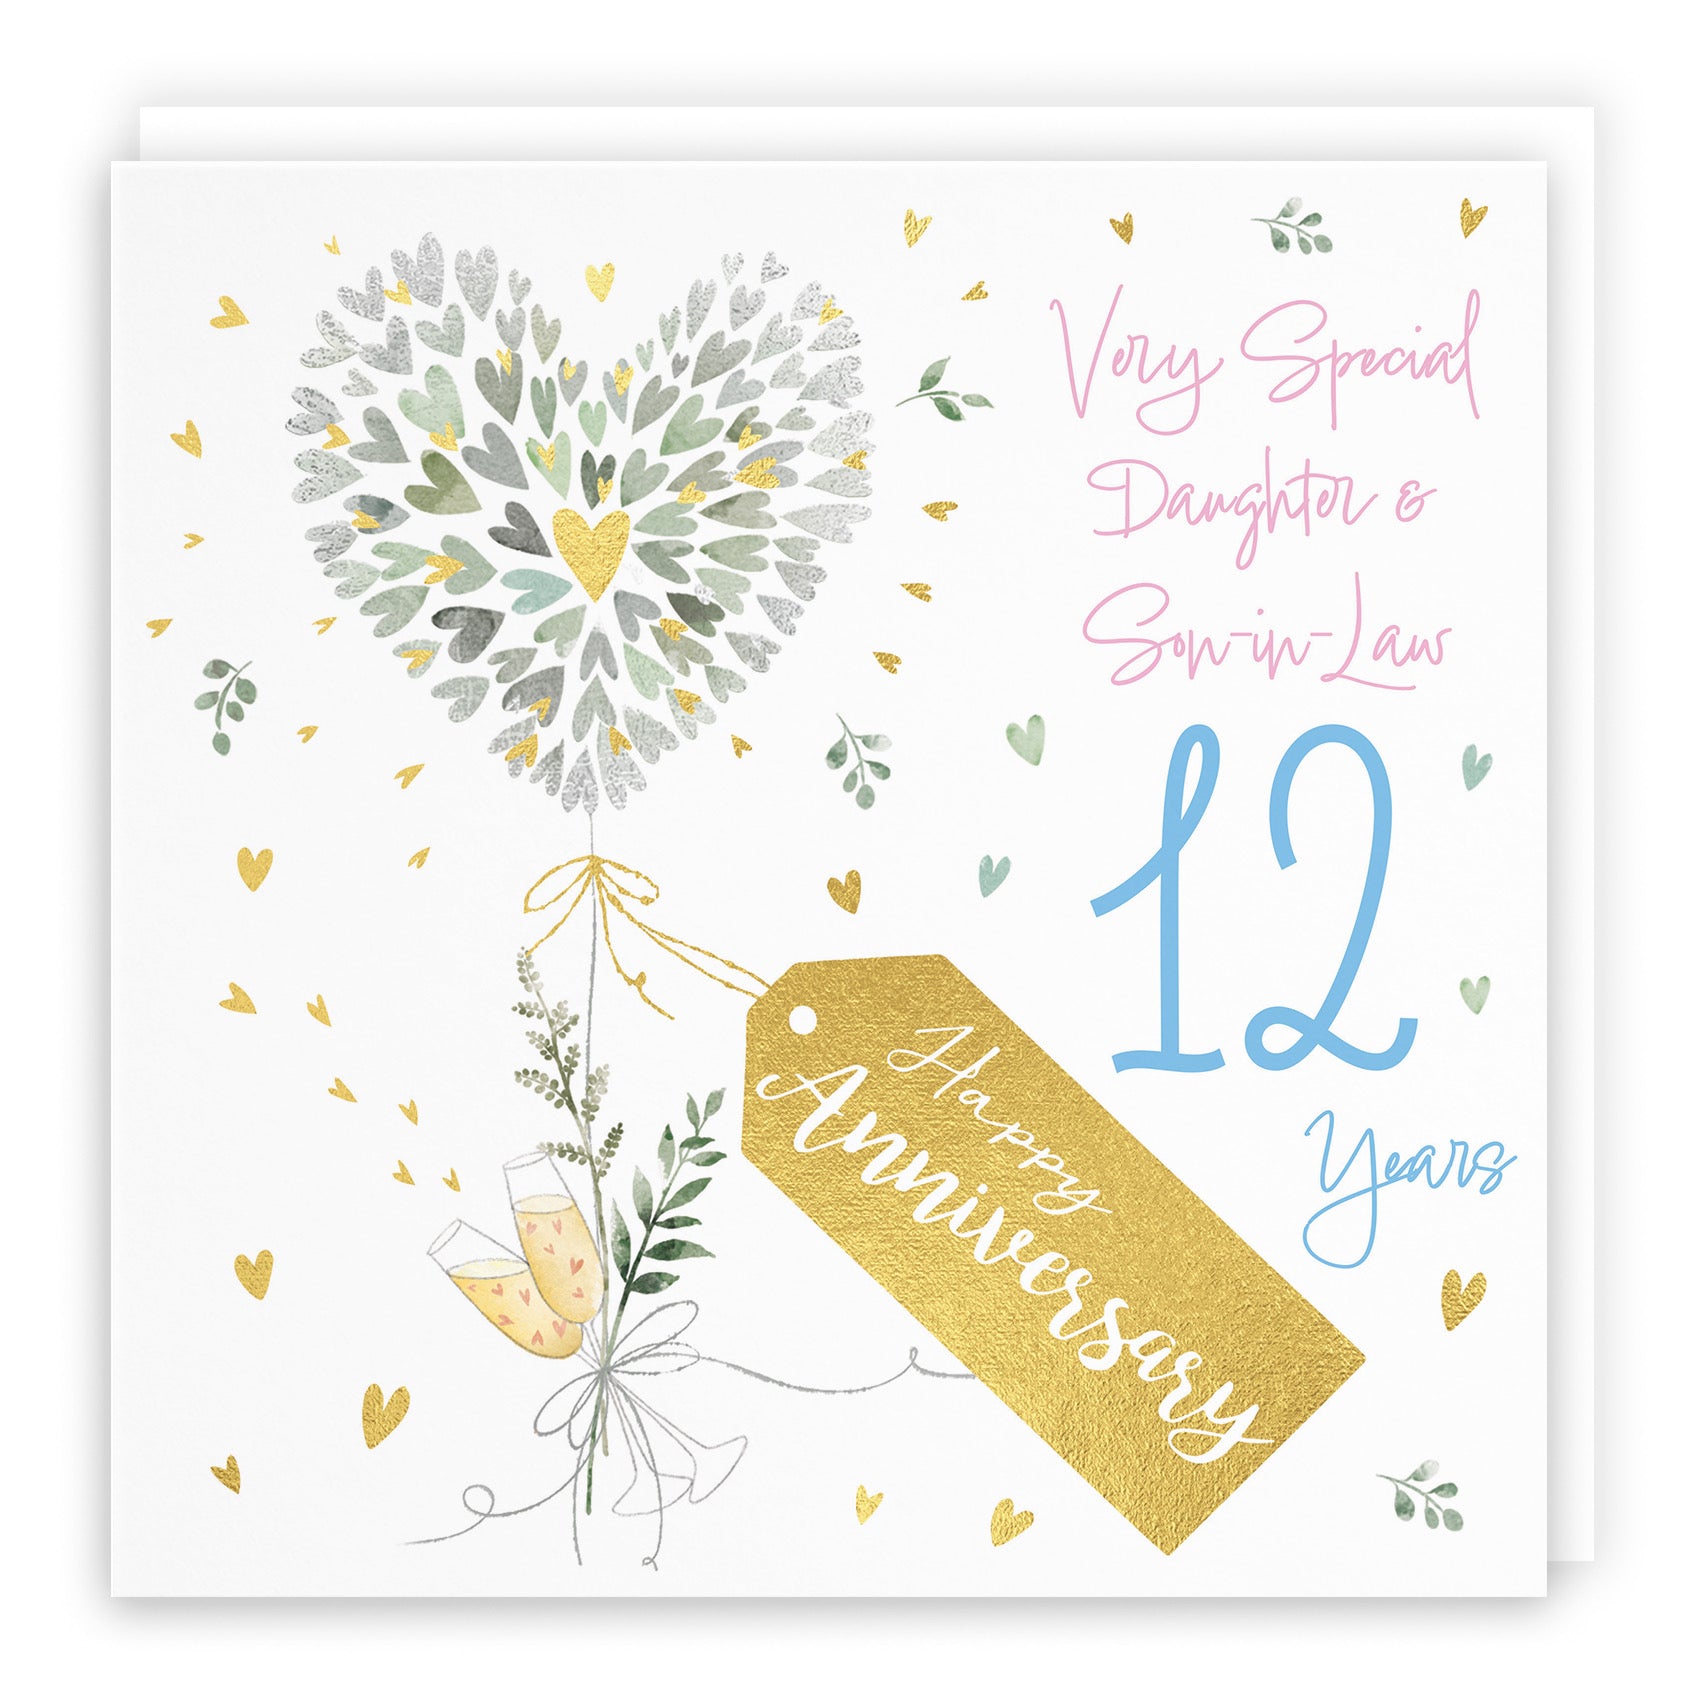 Daughter And Son-in-Law 12th Anniversary Card Contemporary Hearts Milo's Gallery - Default Title (B0CKJ5JXK4)